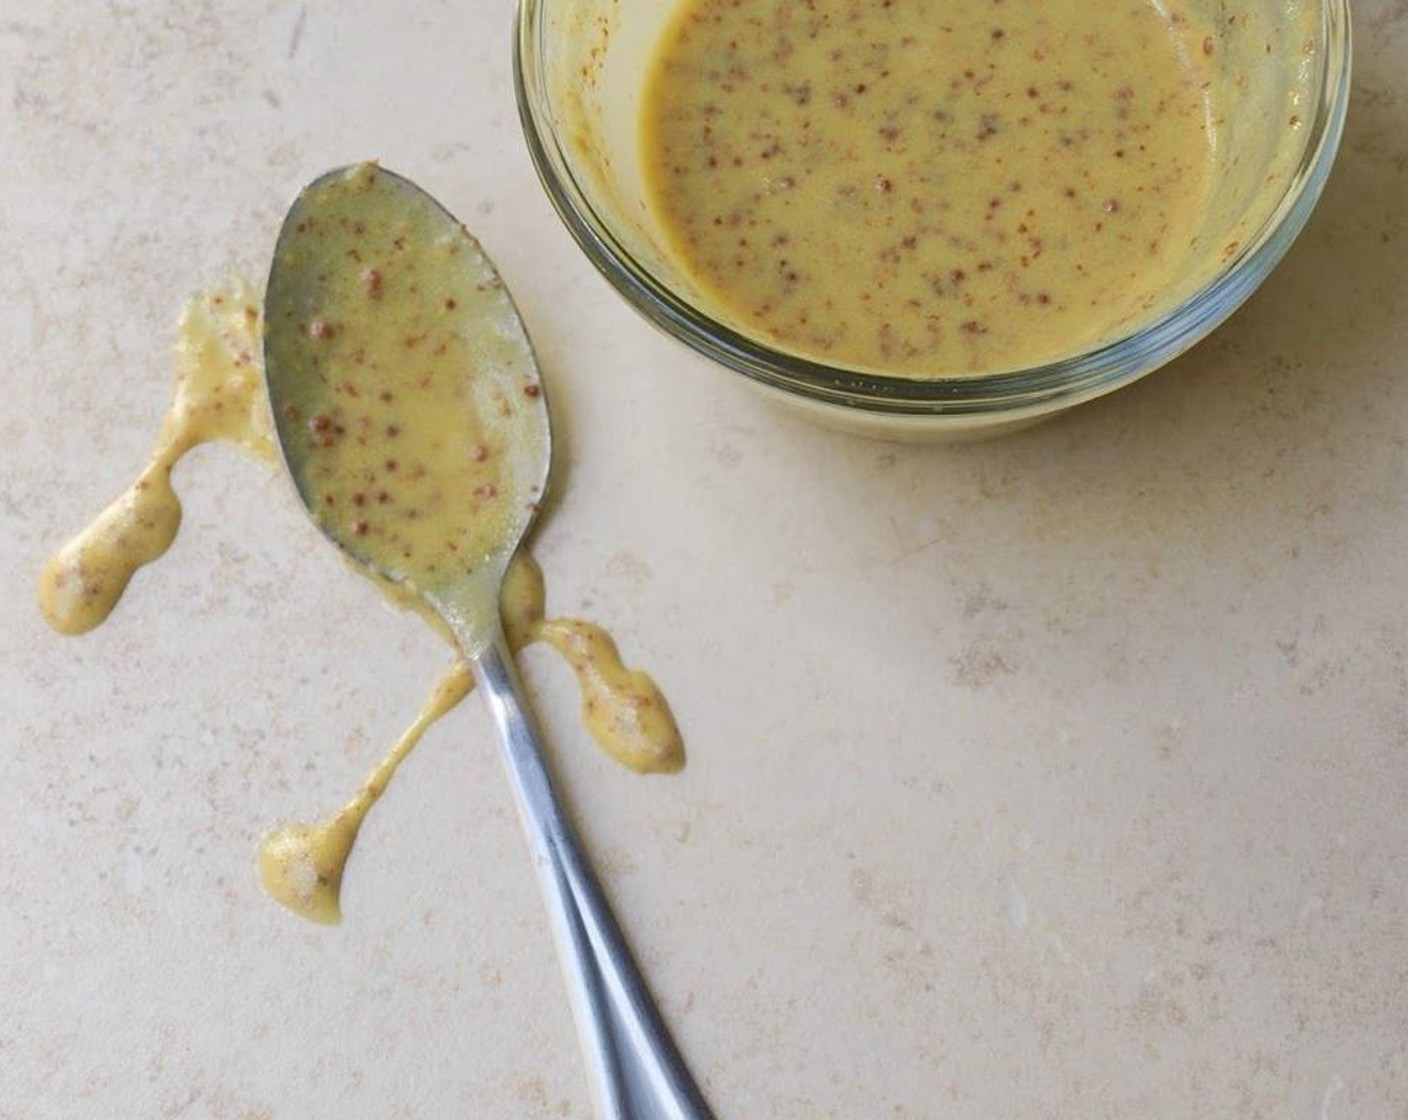 step 5 In a small bowl, combine the Dijon Mustard (1 Tbsp), Whole Grain Mustard (1 Tbsp), juice from Lemon (1), and Olive Oil (1 Tbsp). Set your mustard dressing aside.